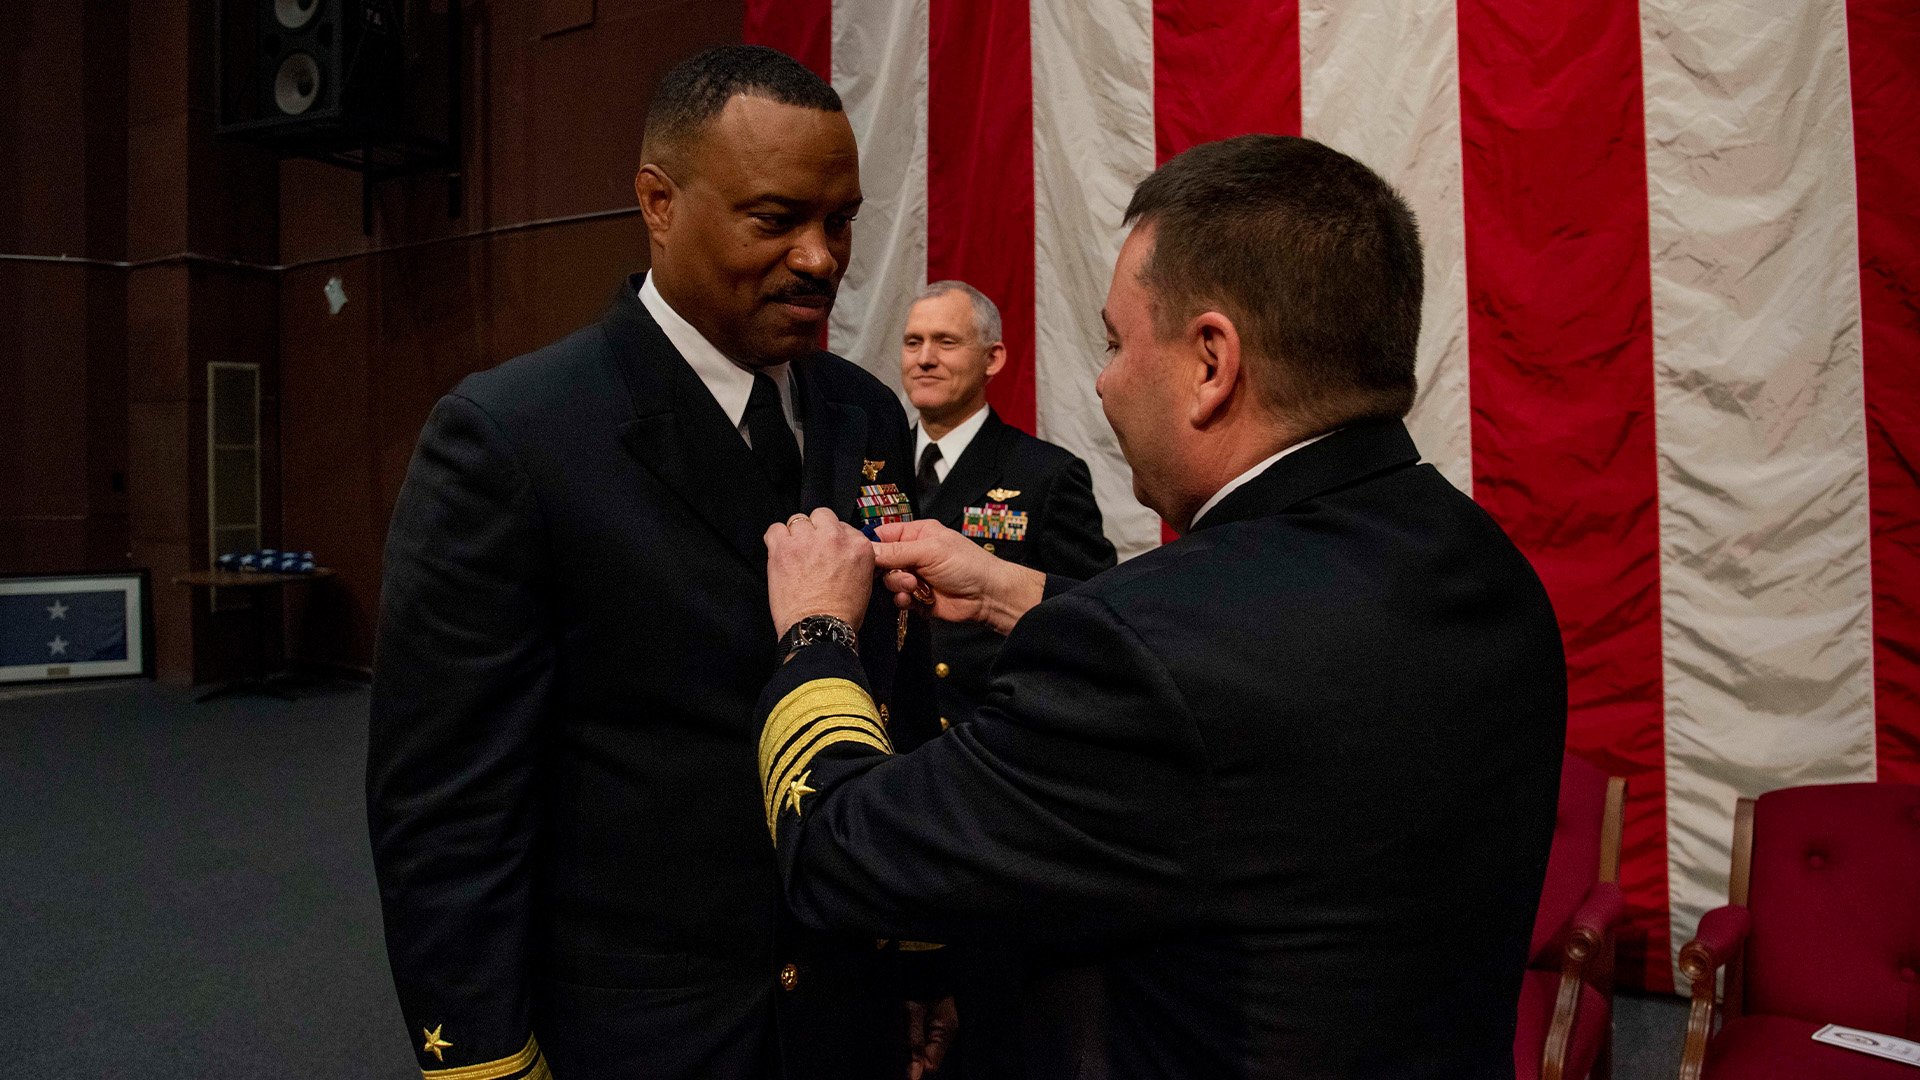 Outgoing commander of Navy Personnel Command, Rear Adm. Alvin "Bull" Holsey receives the Distinguished Service Medal from Vice Adm. Rick Cheeseman, the Chief of Naval Personnel, during a ceremony held at the Pat Thompson Conference Center at Naval Support Activity Mid-South in Millington, Tennessee. US Navy photo by Mass Communication Specialist 2nd Class Jared Catlett.